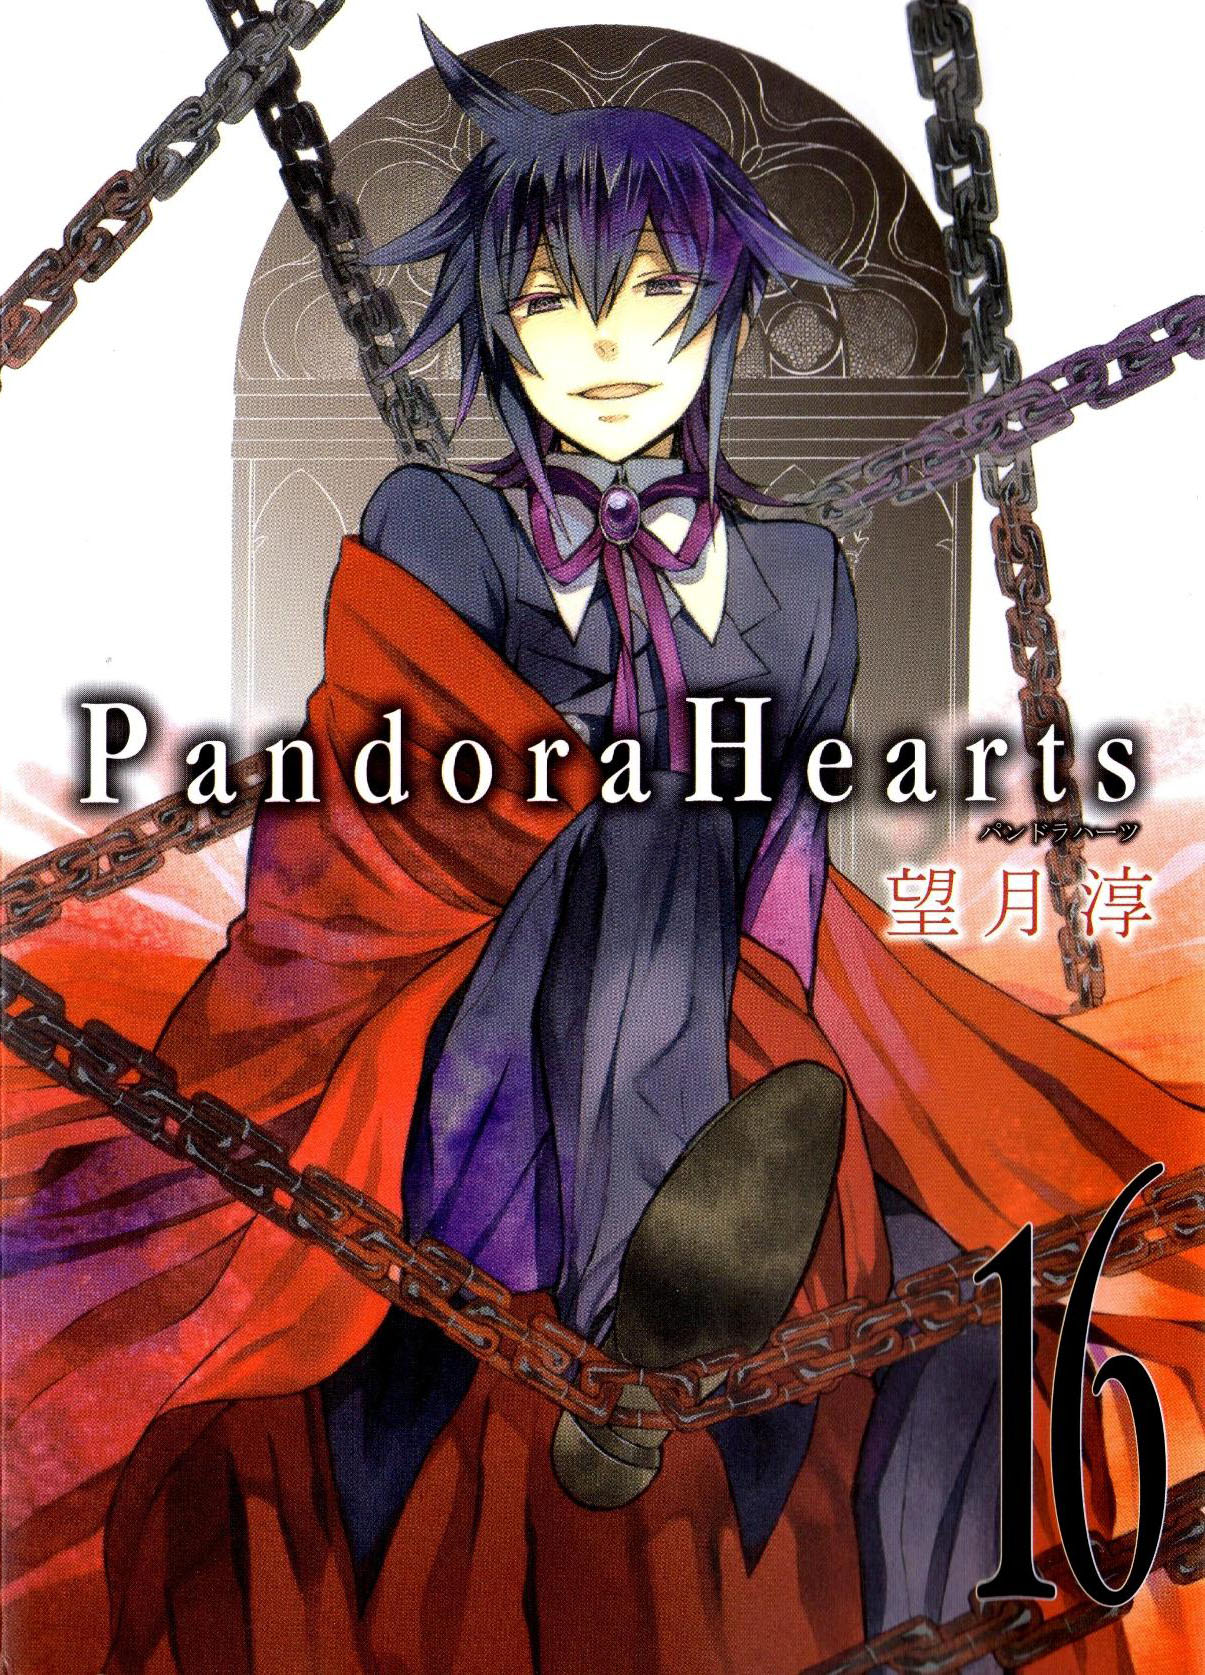 Athah Anime Pandora Hearts Xerxes Break Alice Baskerville Oz Vessalius Reim  Lunettes Gilbert Nightray 13*19 inches Wall Poster Matte Finish Paper Print  - Animation & Cartoons posters in India - Buy art,